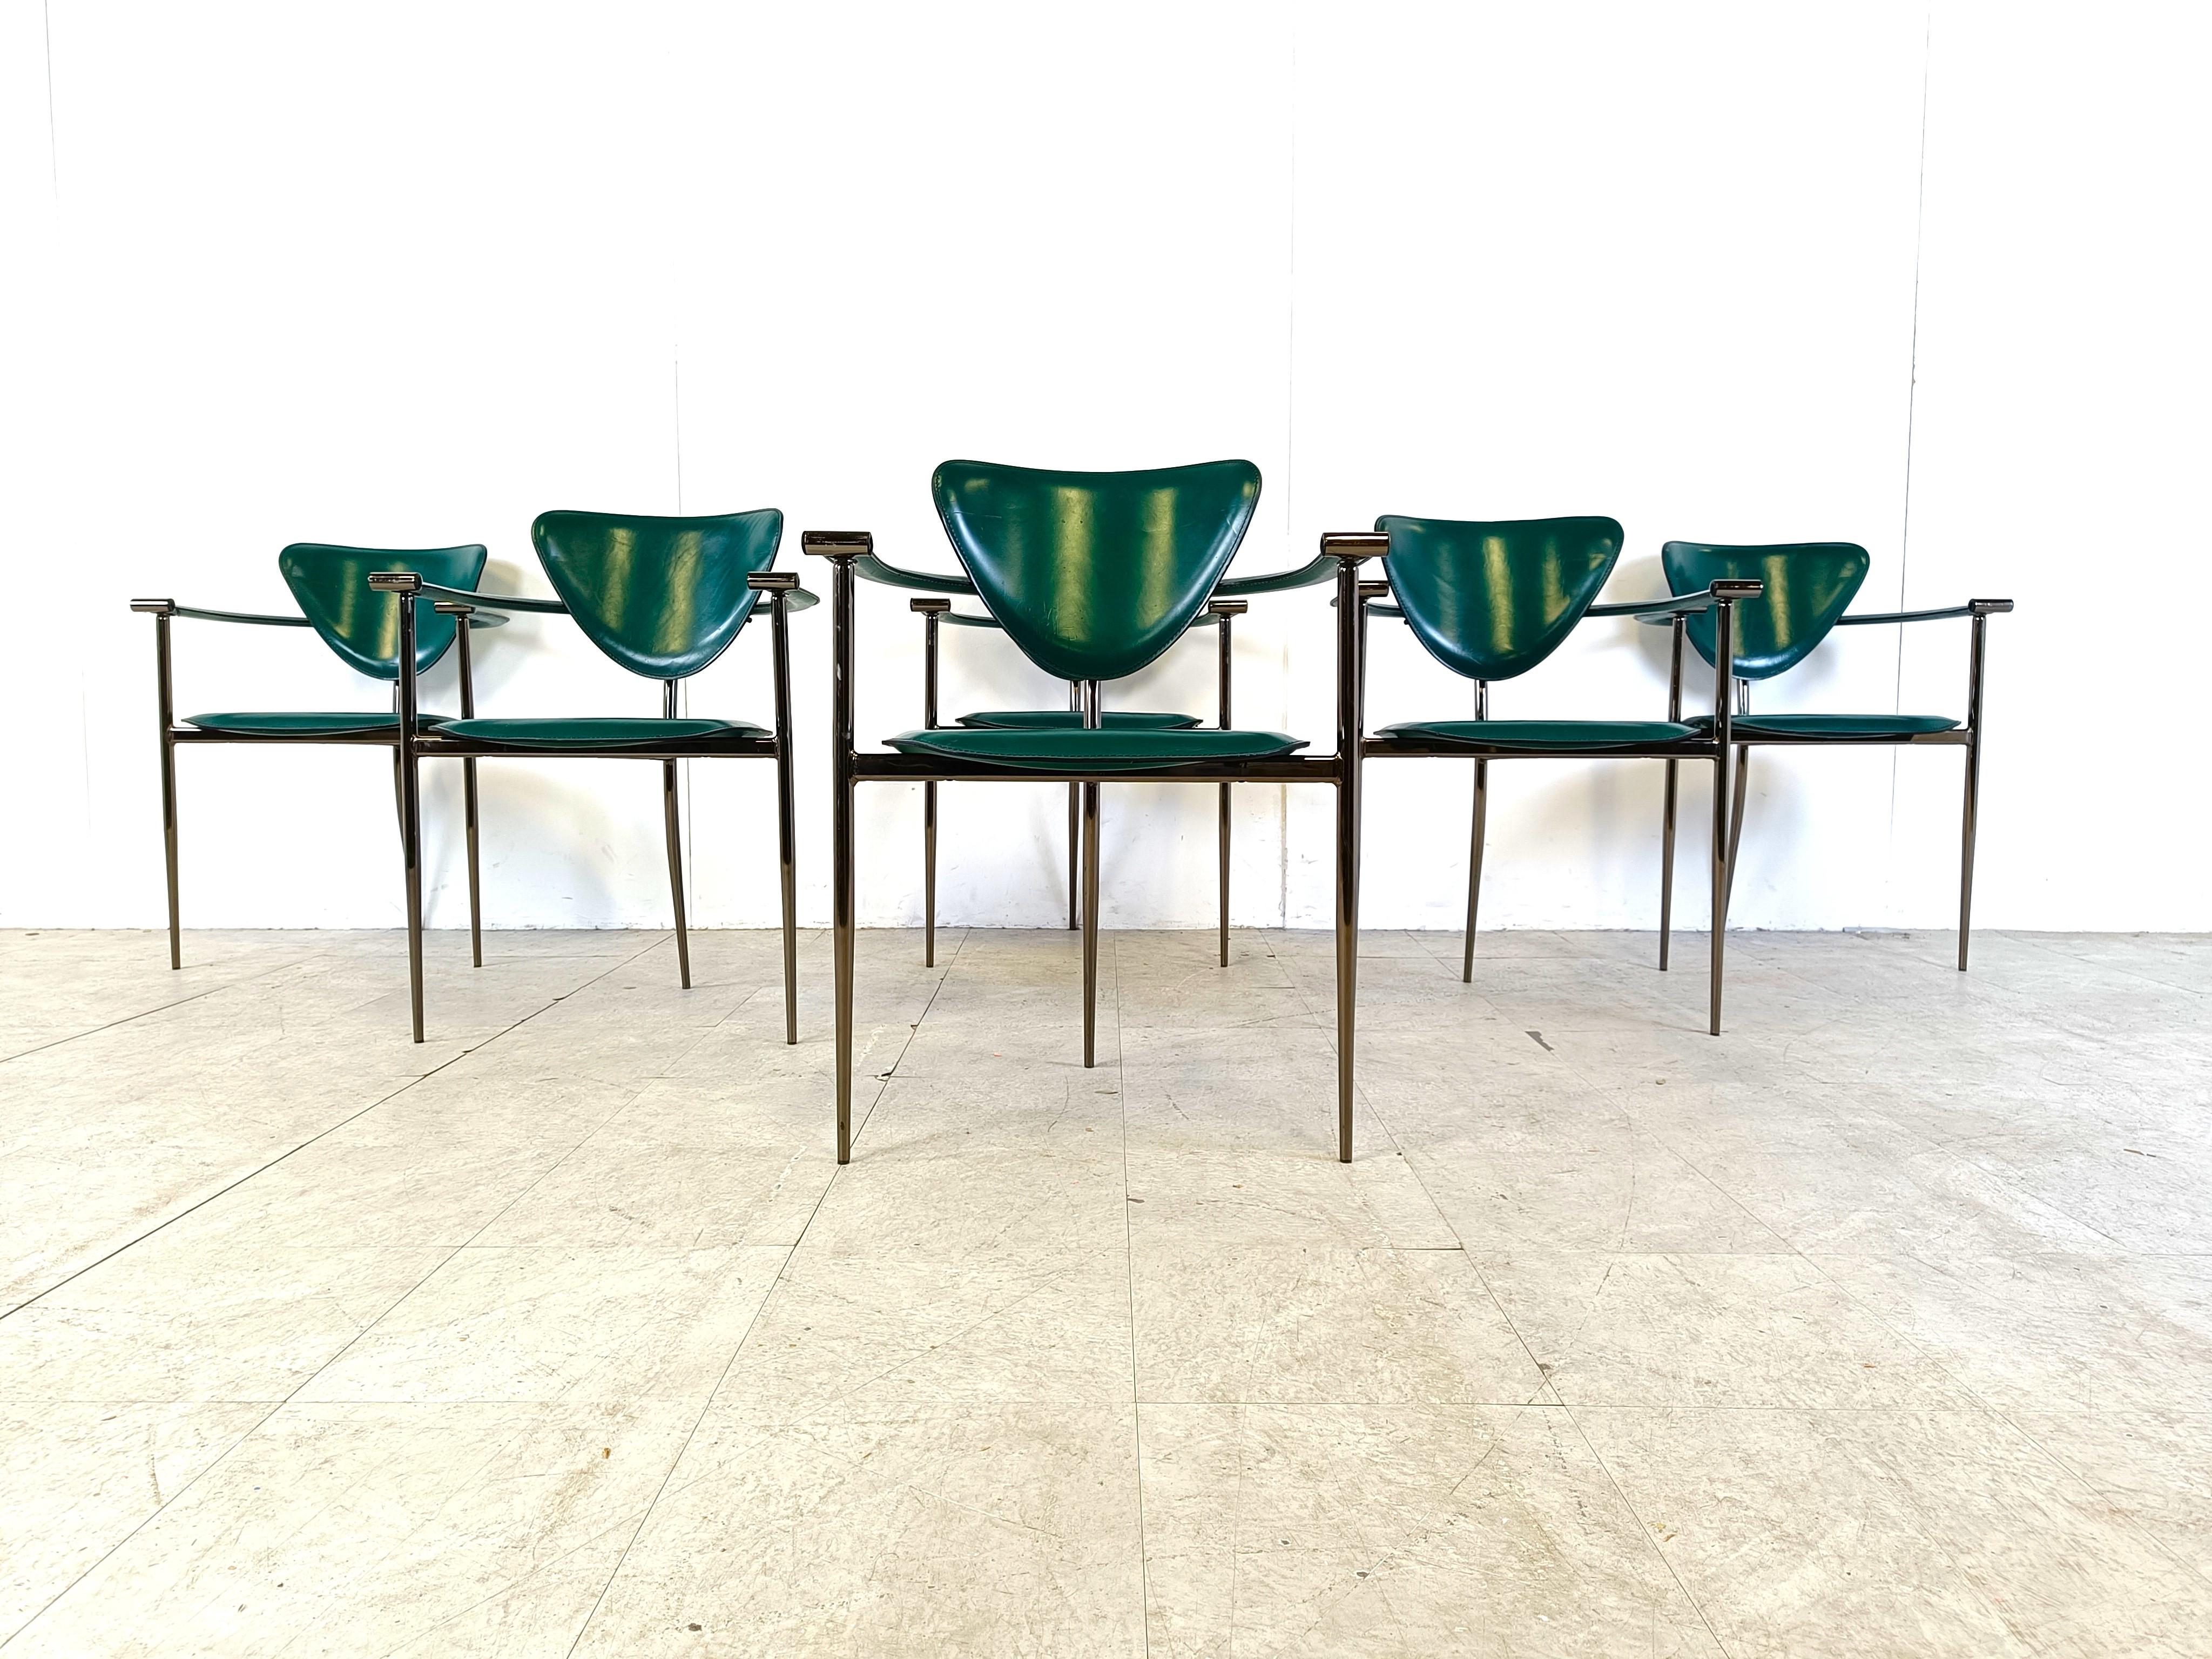 Set of 6 italian dining chairs consisting of metal frames with dark green leather upholstery.

Cool tripod design with curved metal legs.

Very good condition

1980s - Italy

Dimensions:
Height: 80cm/31.49